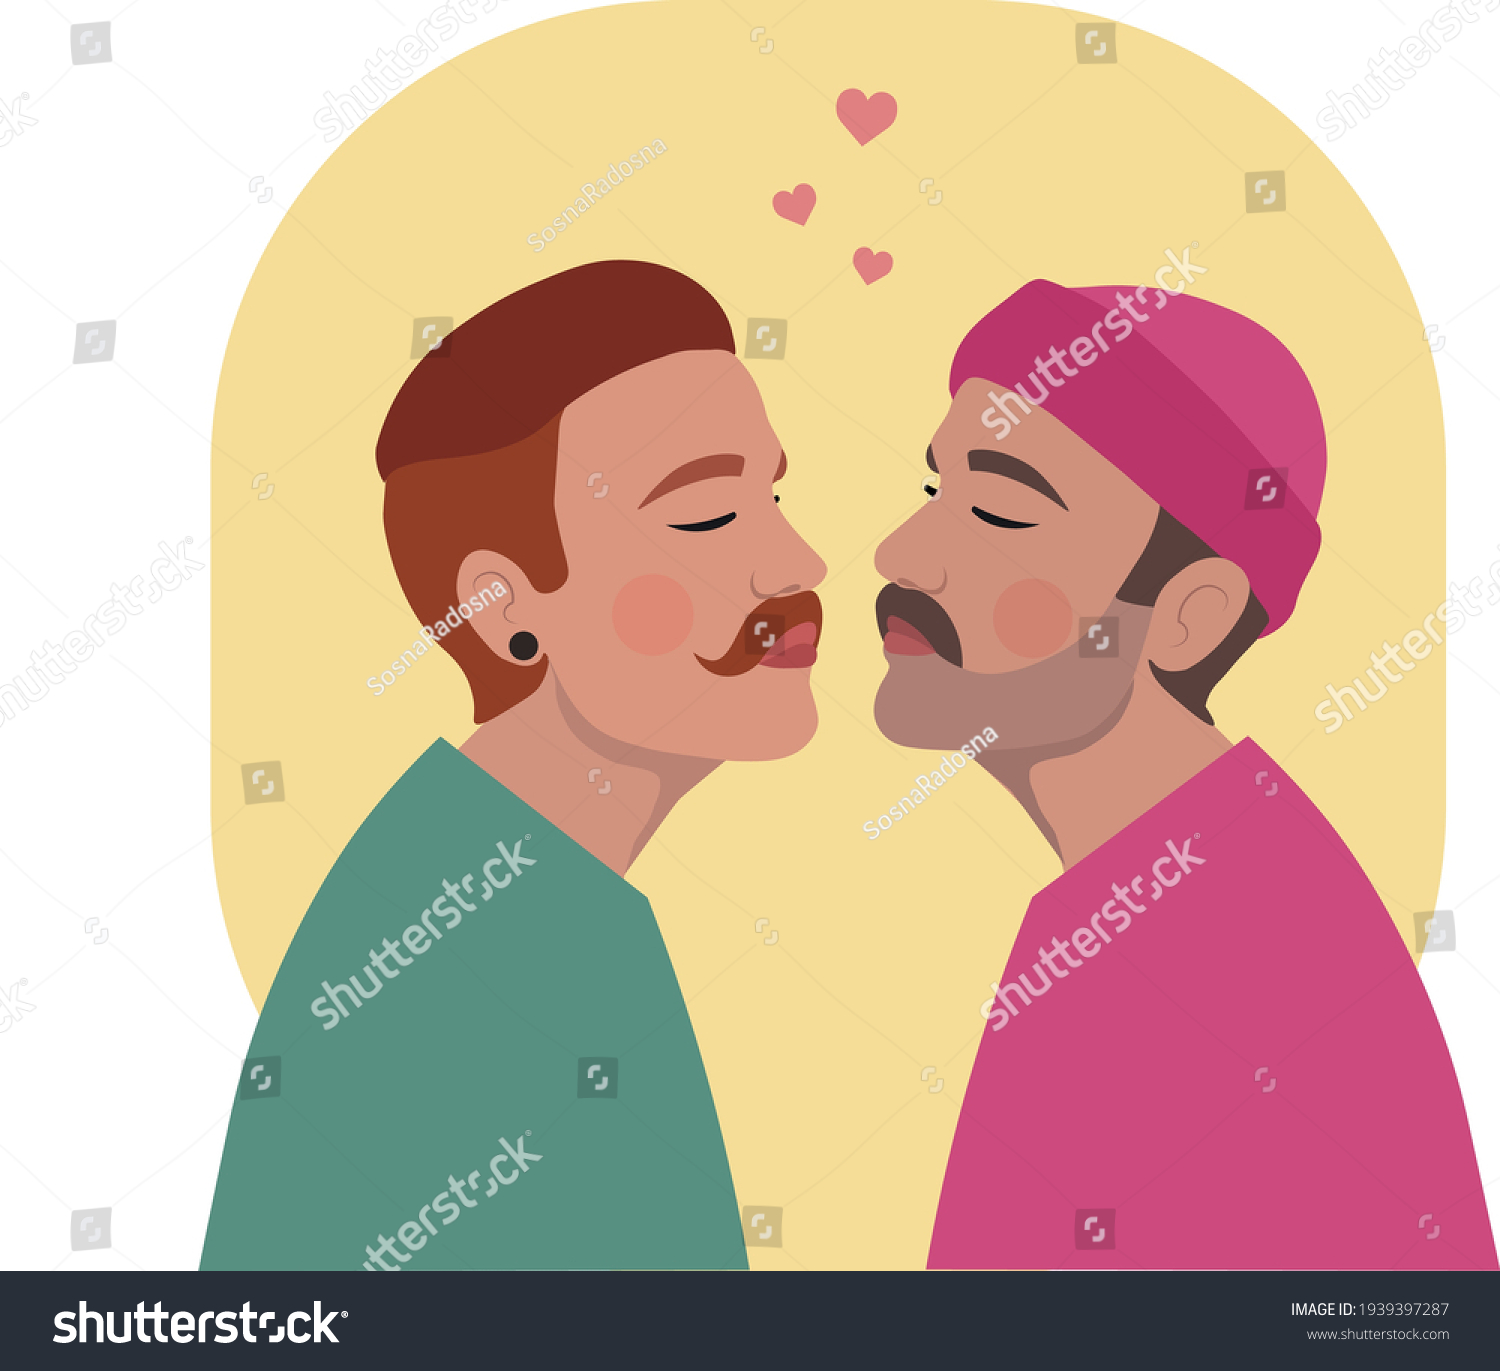 Gay Couple Kissing Lgbt Rights Vector Stock Vector Royalty Free 1939397287 Shutterstock 4238